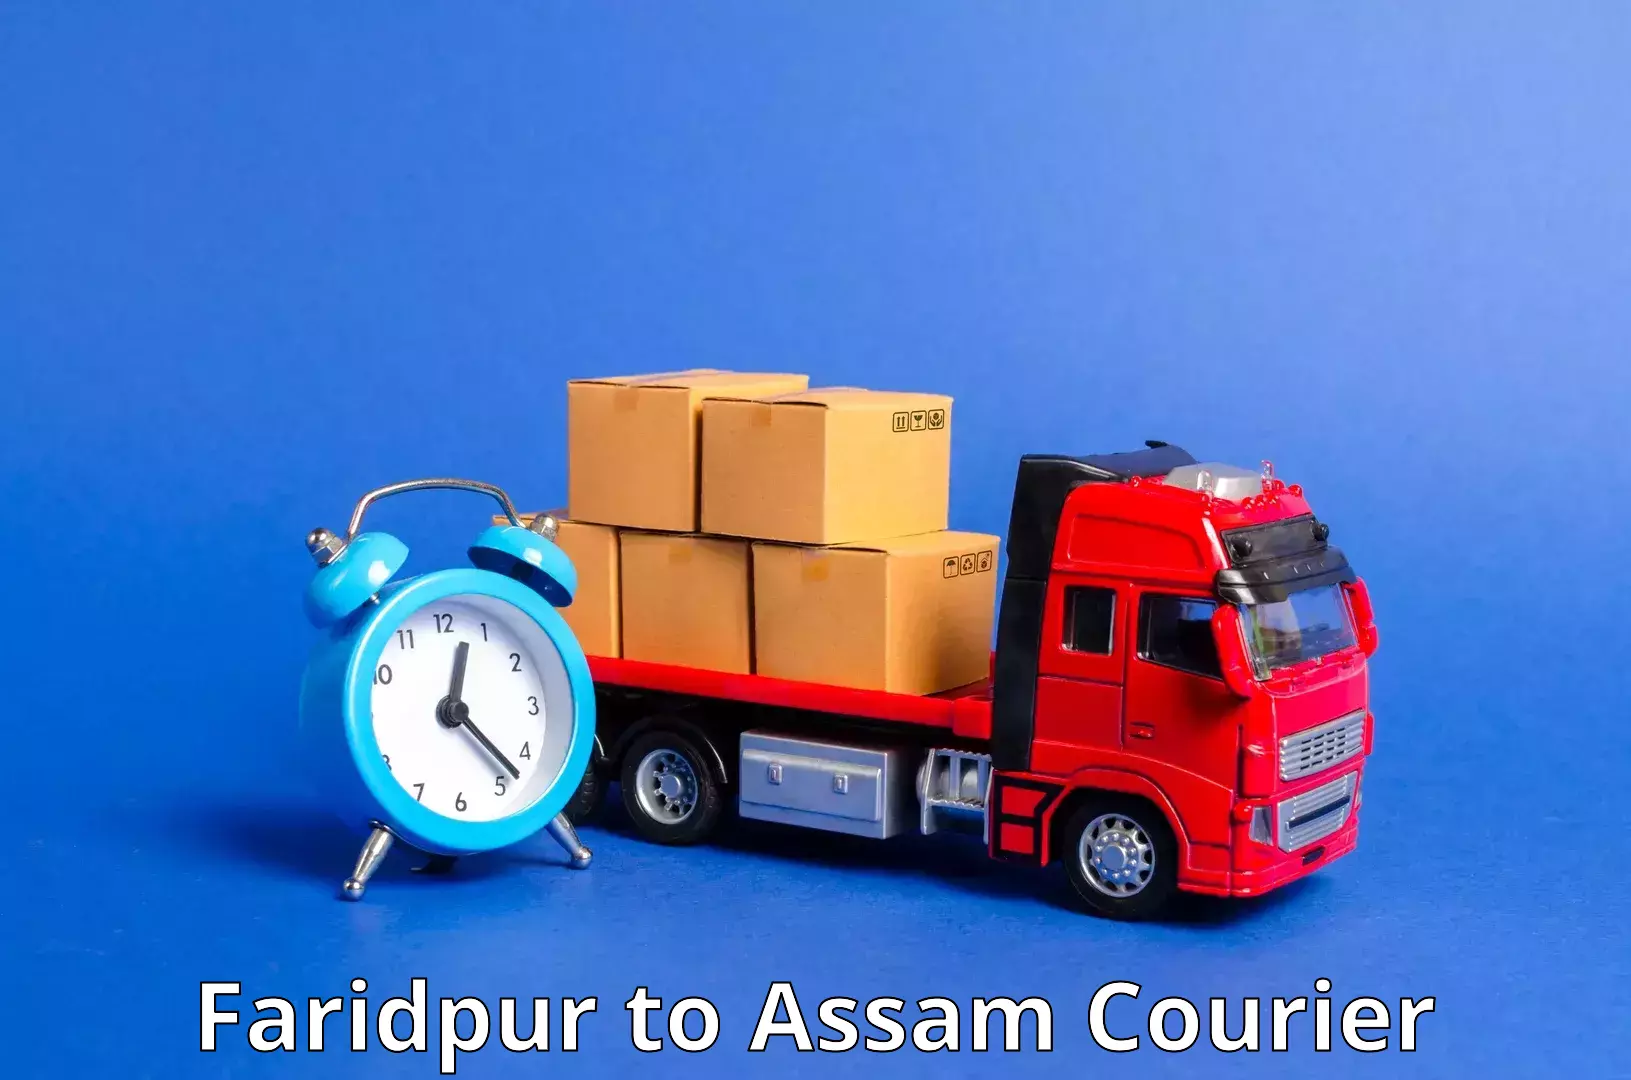 Professional courier handling in Faridpur to Kamrup